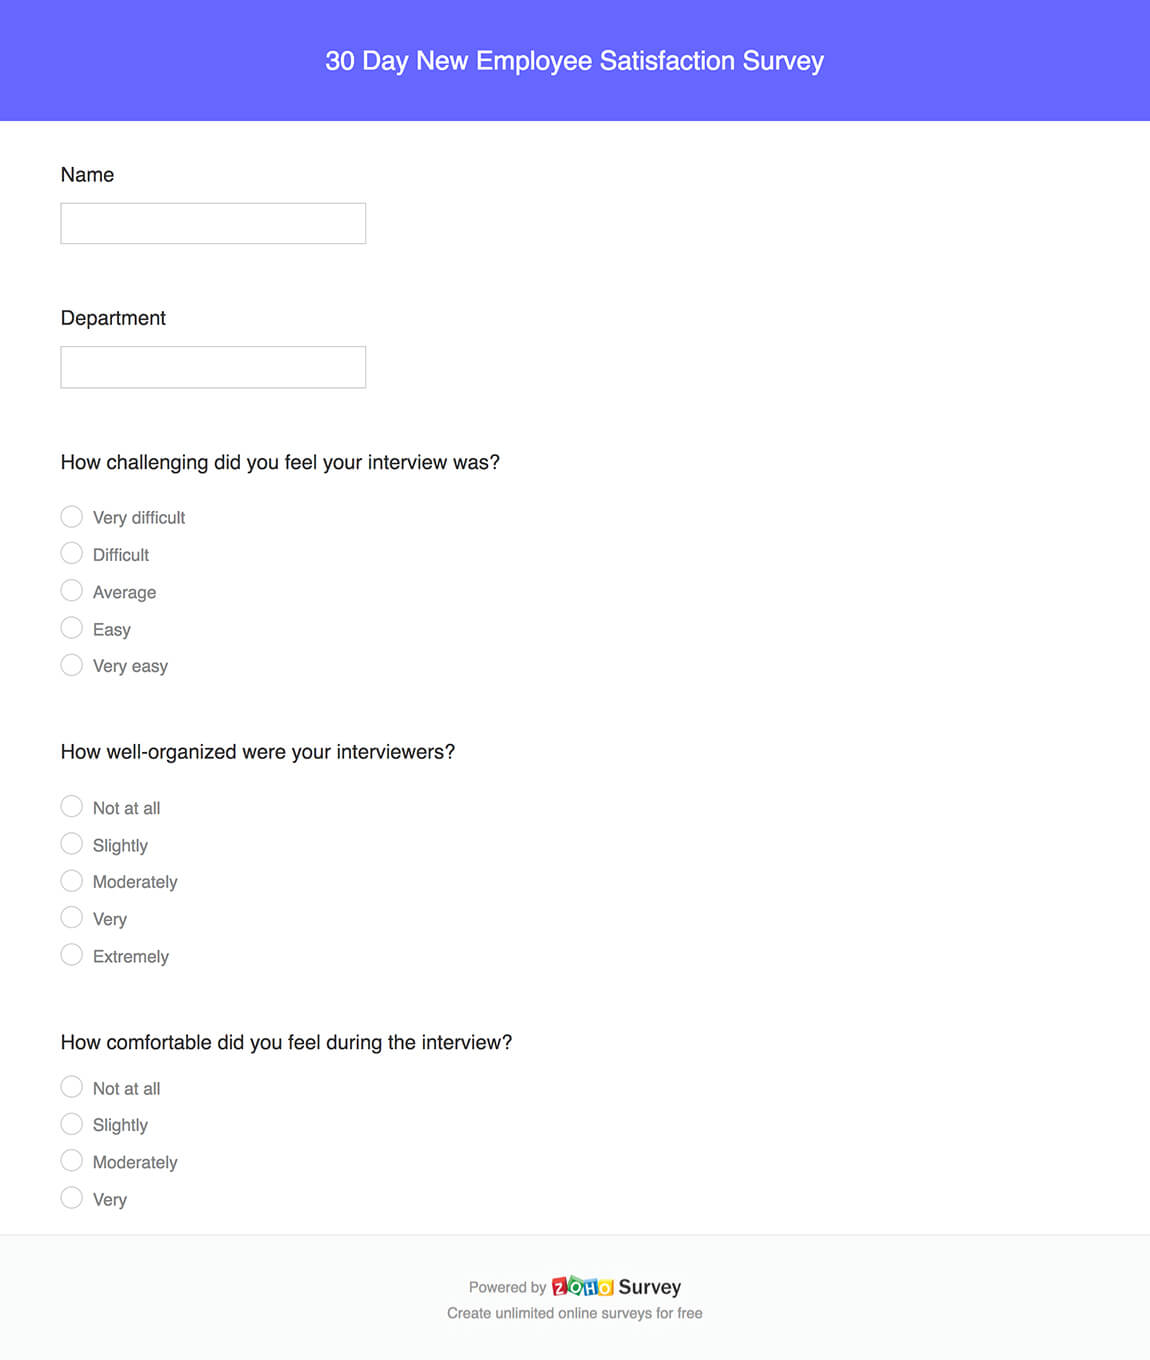 30 day new employee satisfaction survey questionnaire template